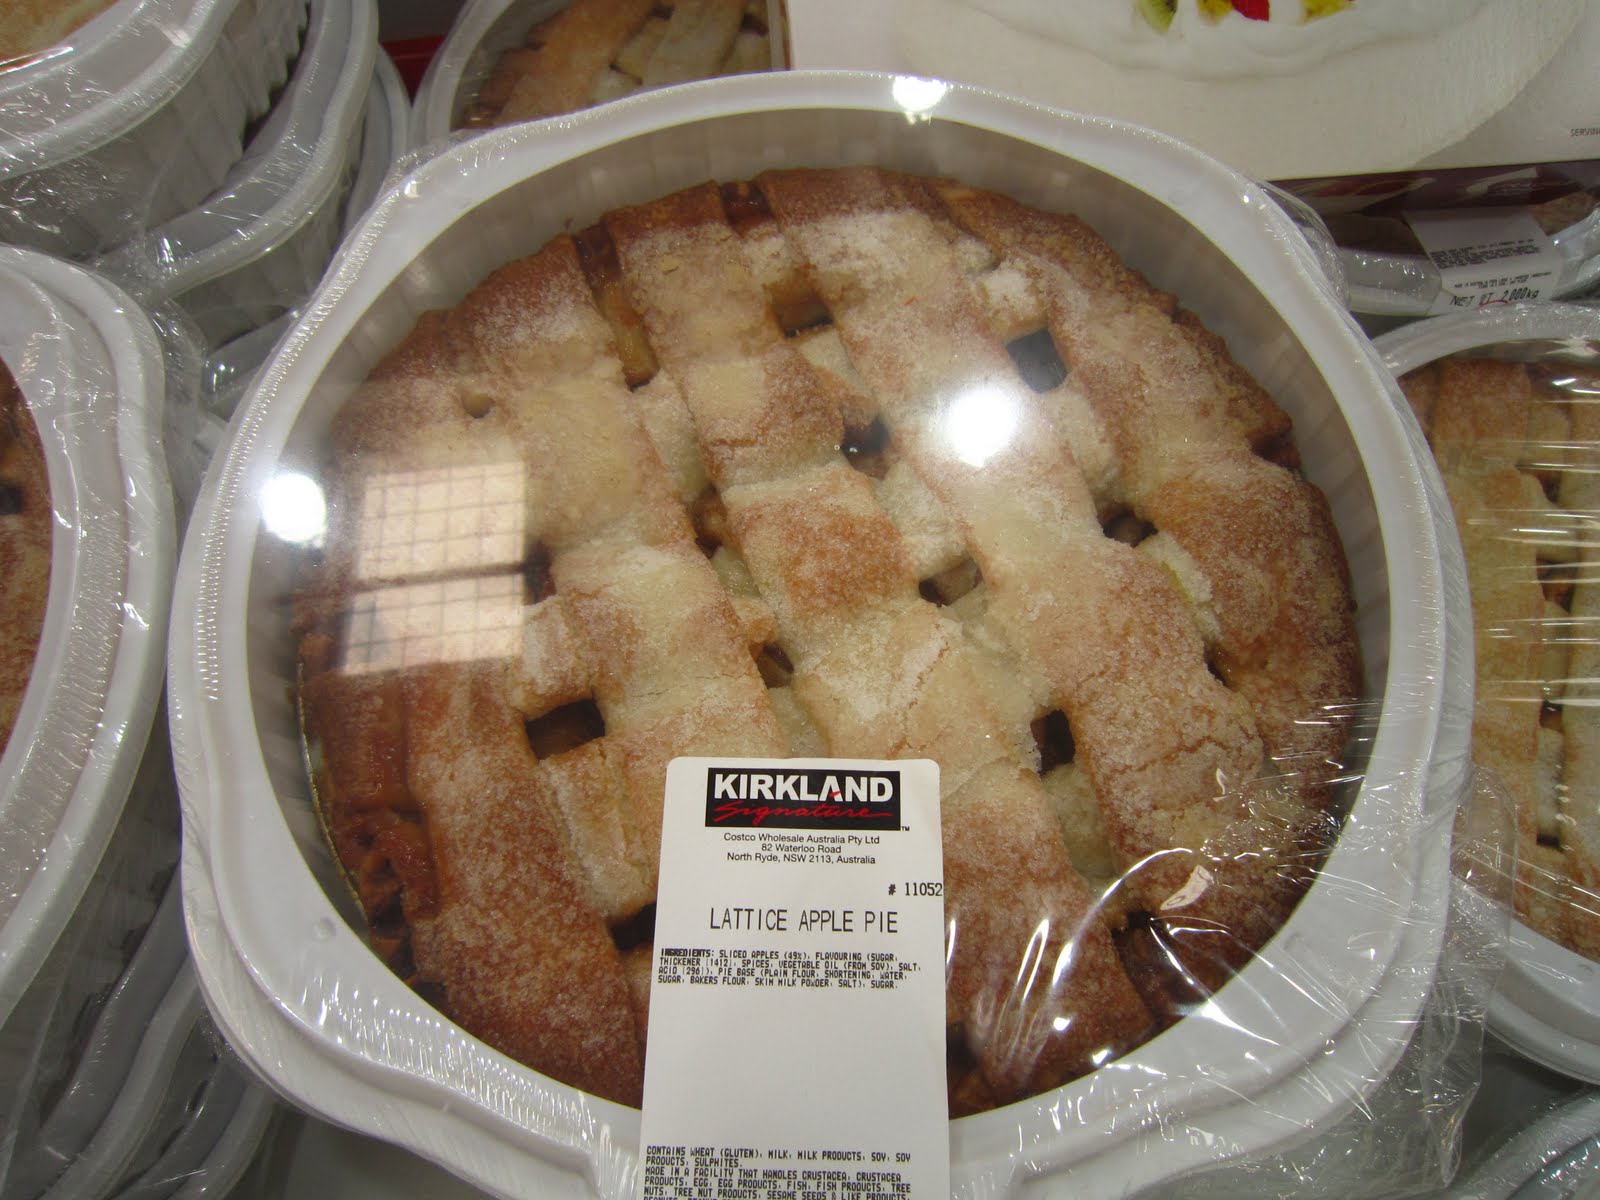 Costco Pumpkin Pie Meme  : Make Your Own Images With Our Meme Generator Or Animated Gif Maker.